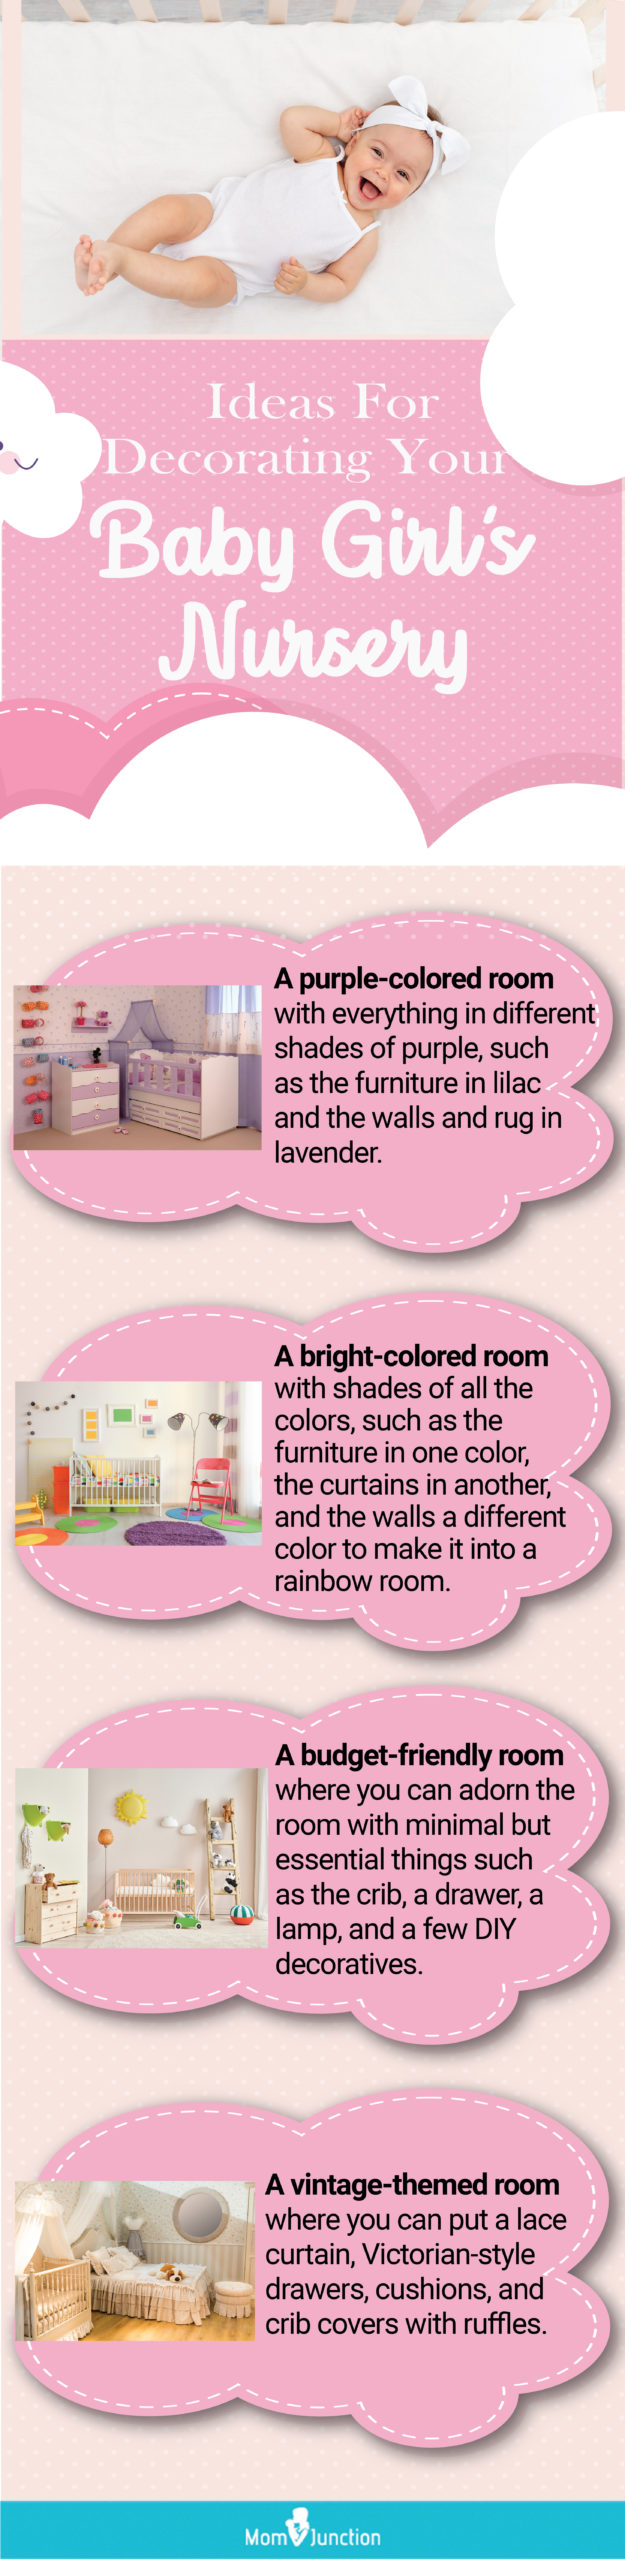 cute baby girl room ideas [infographic]